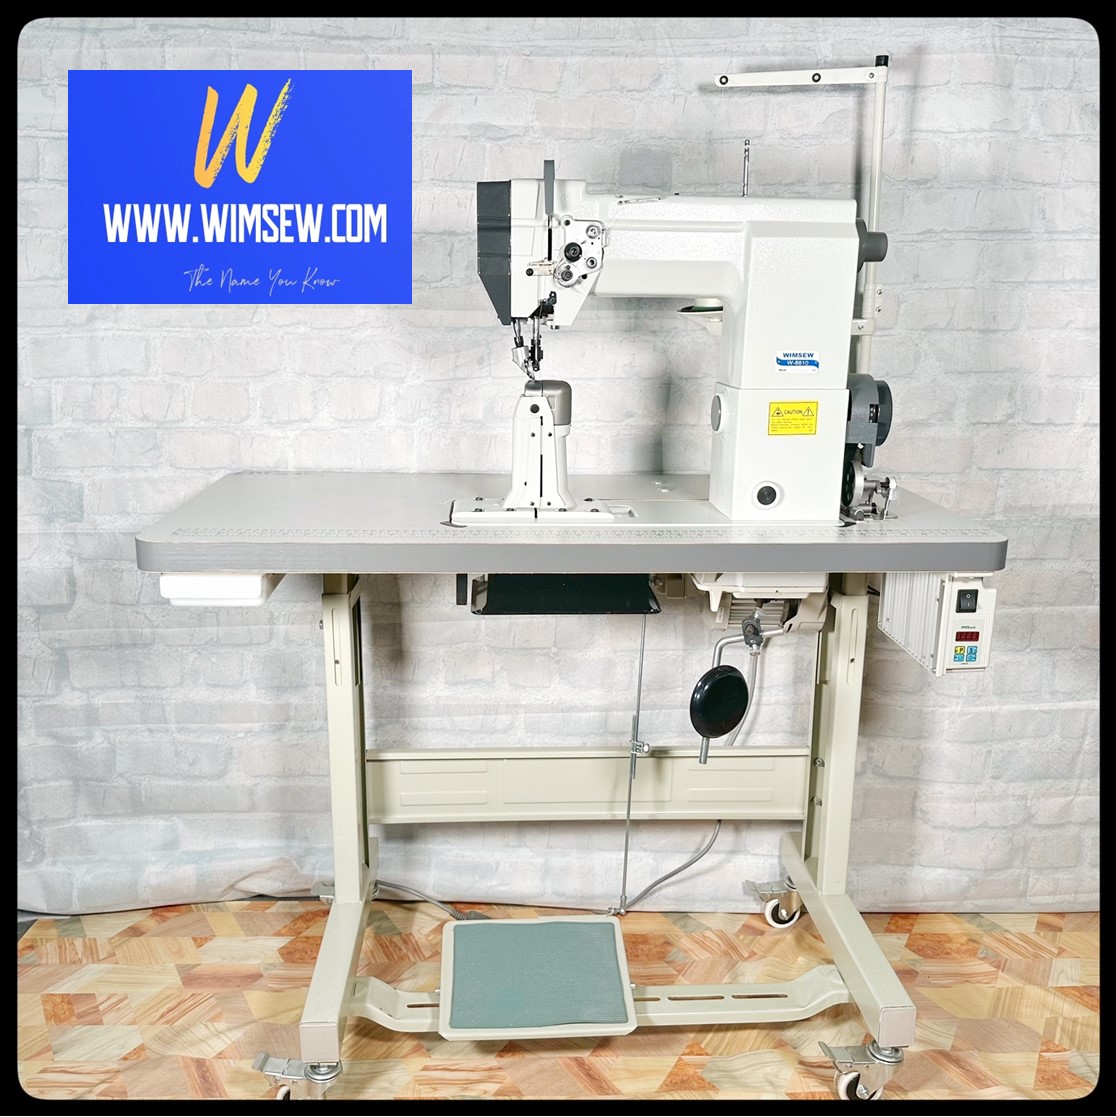 WIMSEW 8810 Post Machine - Call now for more information. 020 8767 0036 - choose option 3